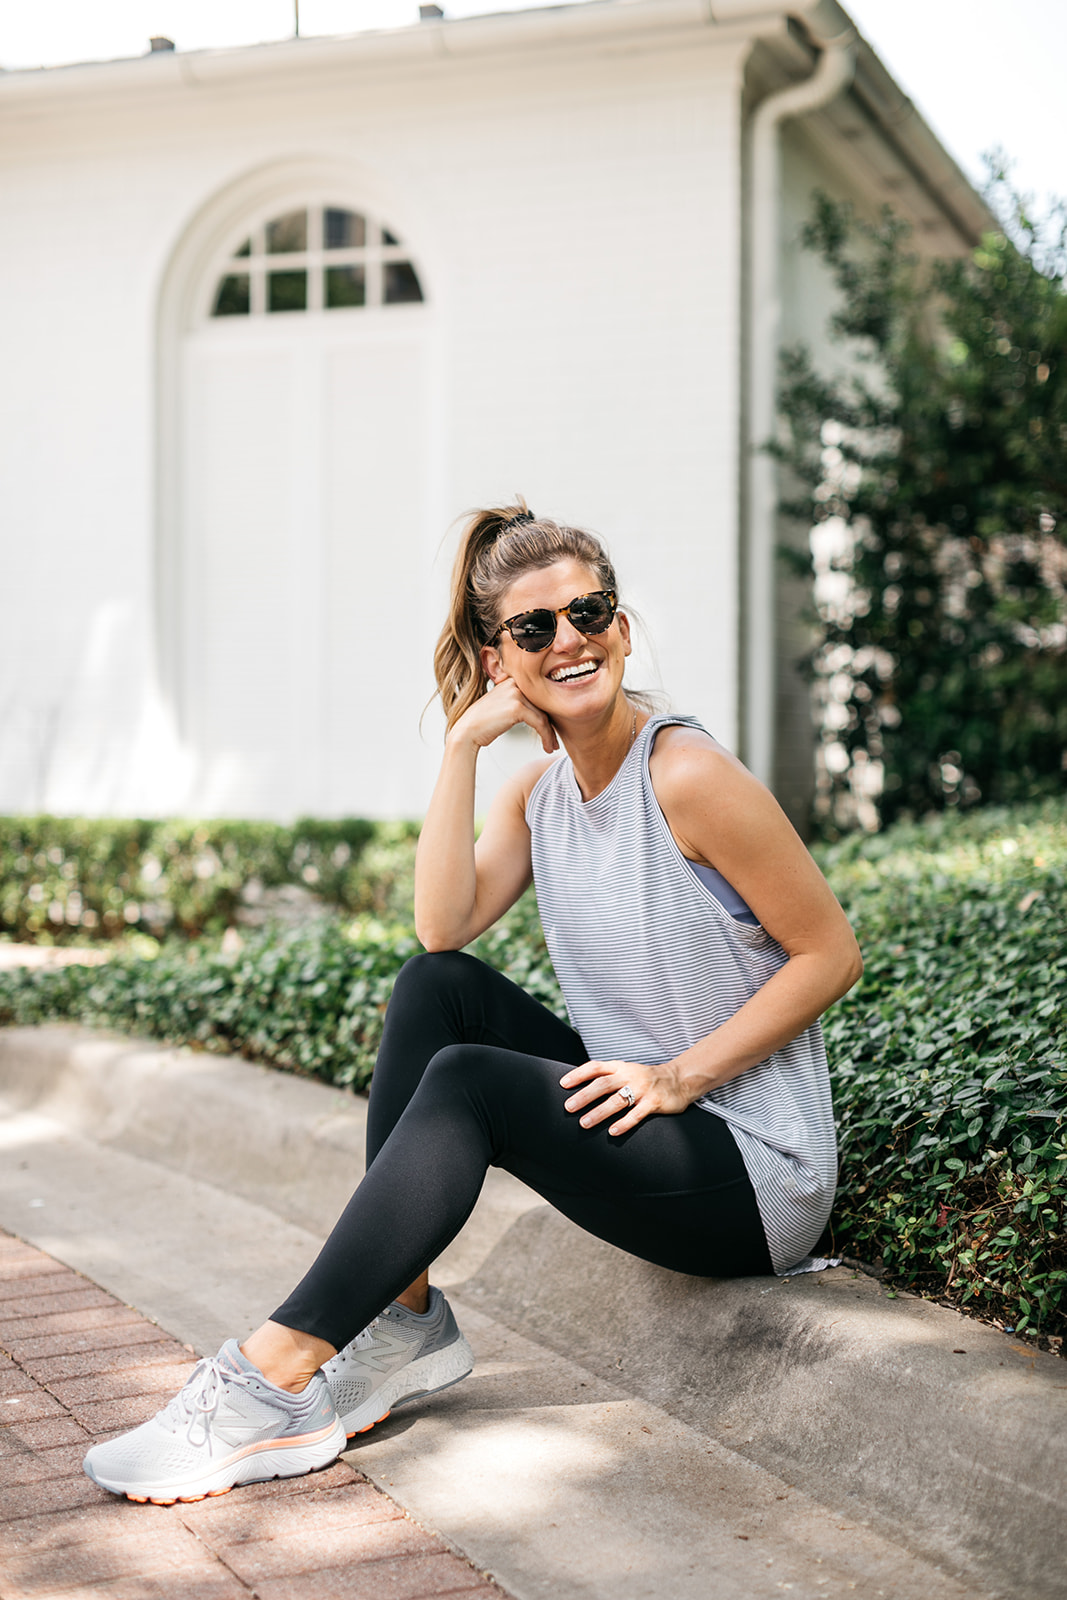 brighton butler wearing nordstrom athleisure white and grey tank with black leggings